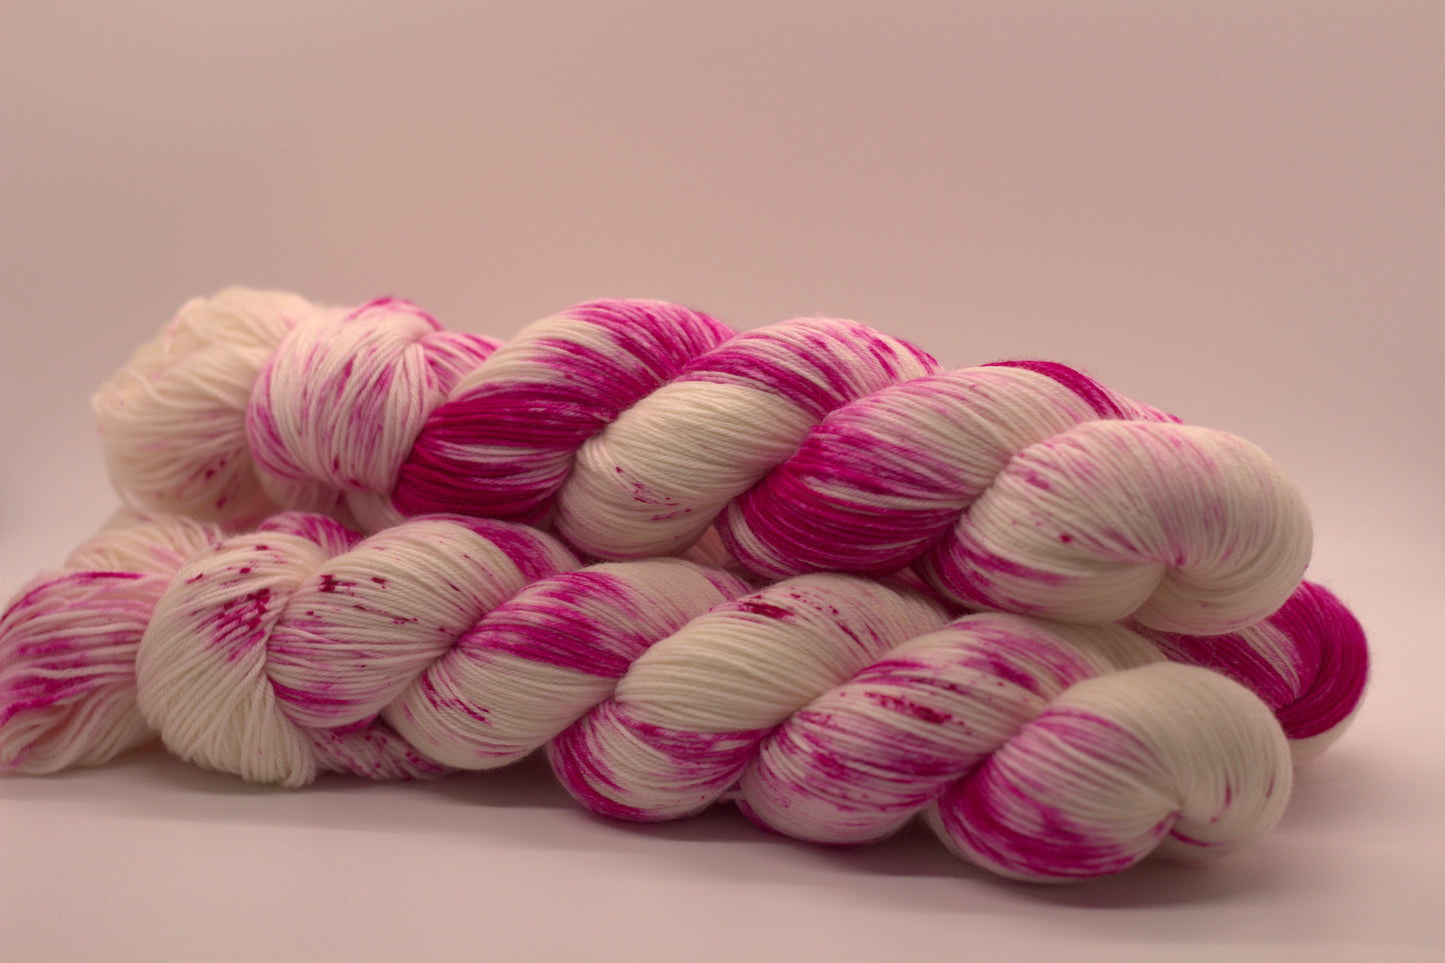 side view of three twisted skeins bright pink speckled yarn on white background.